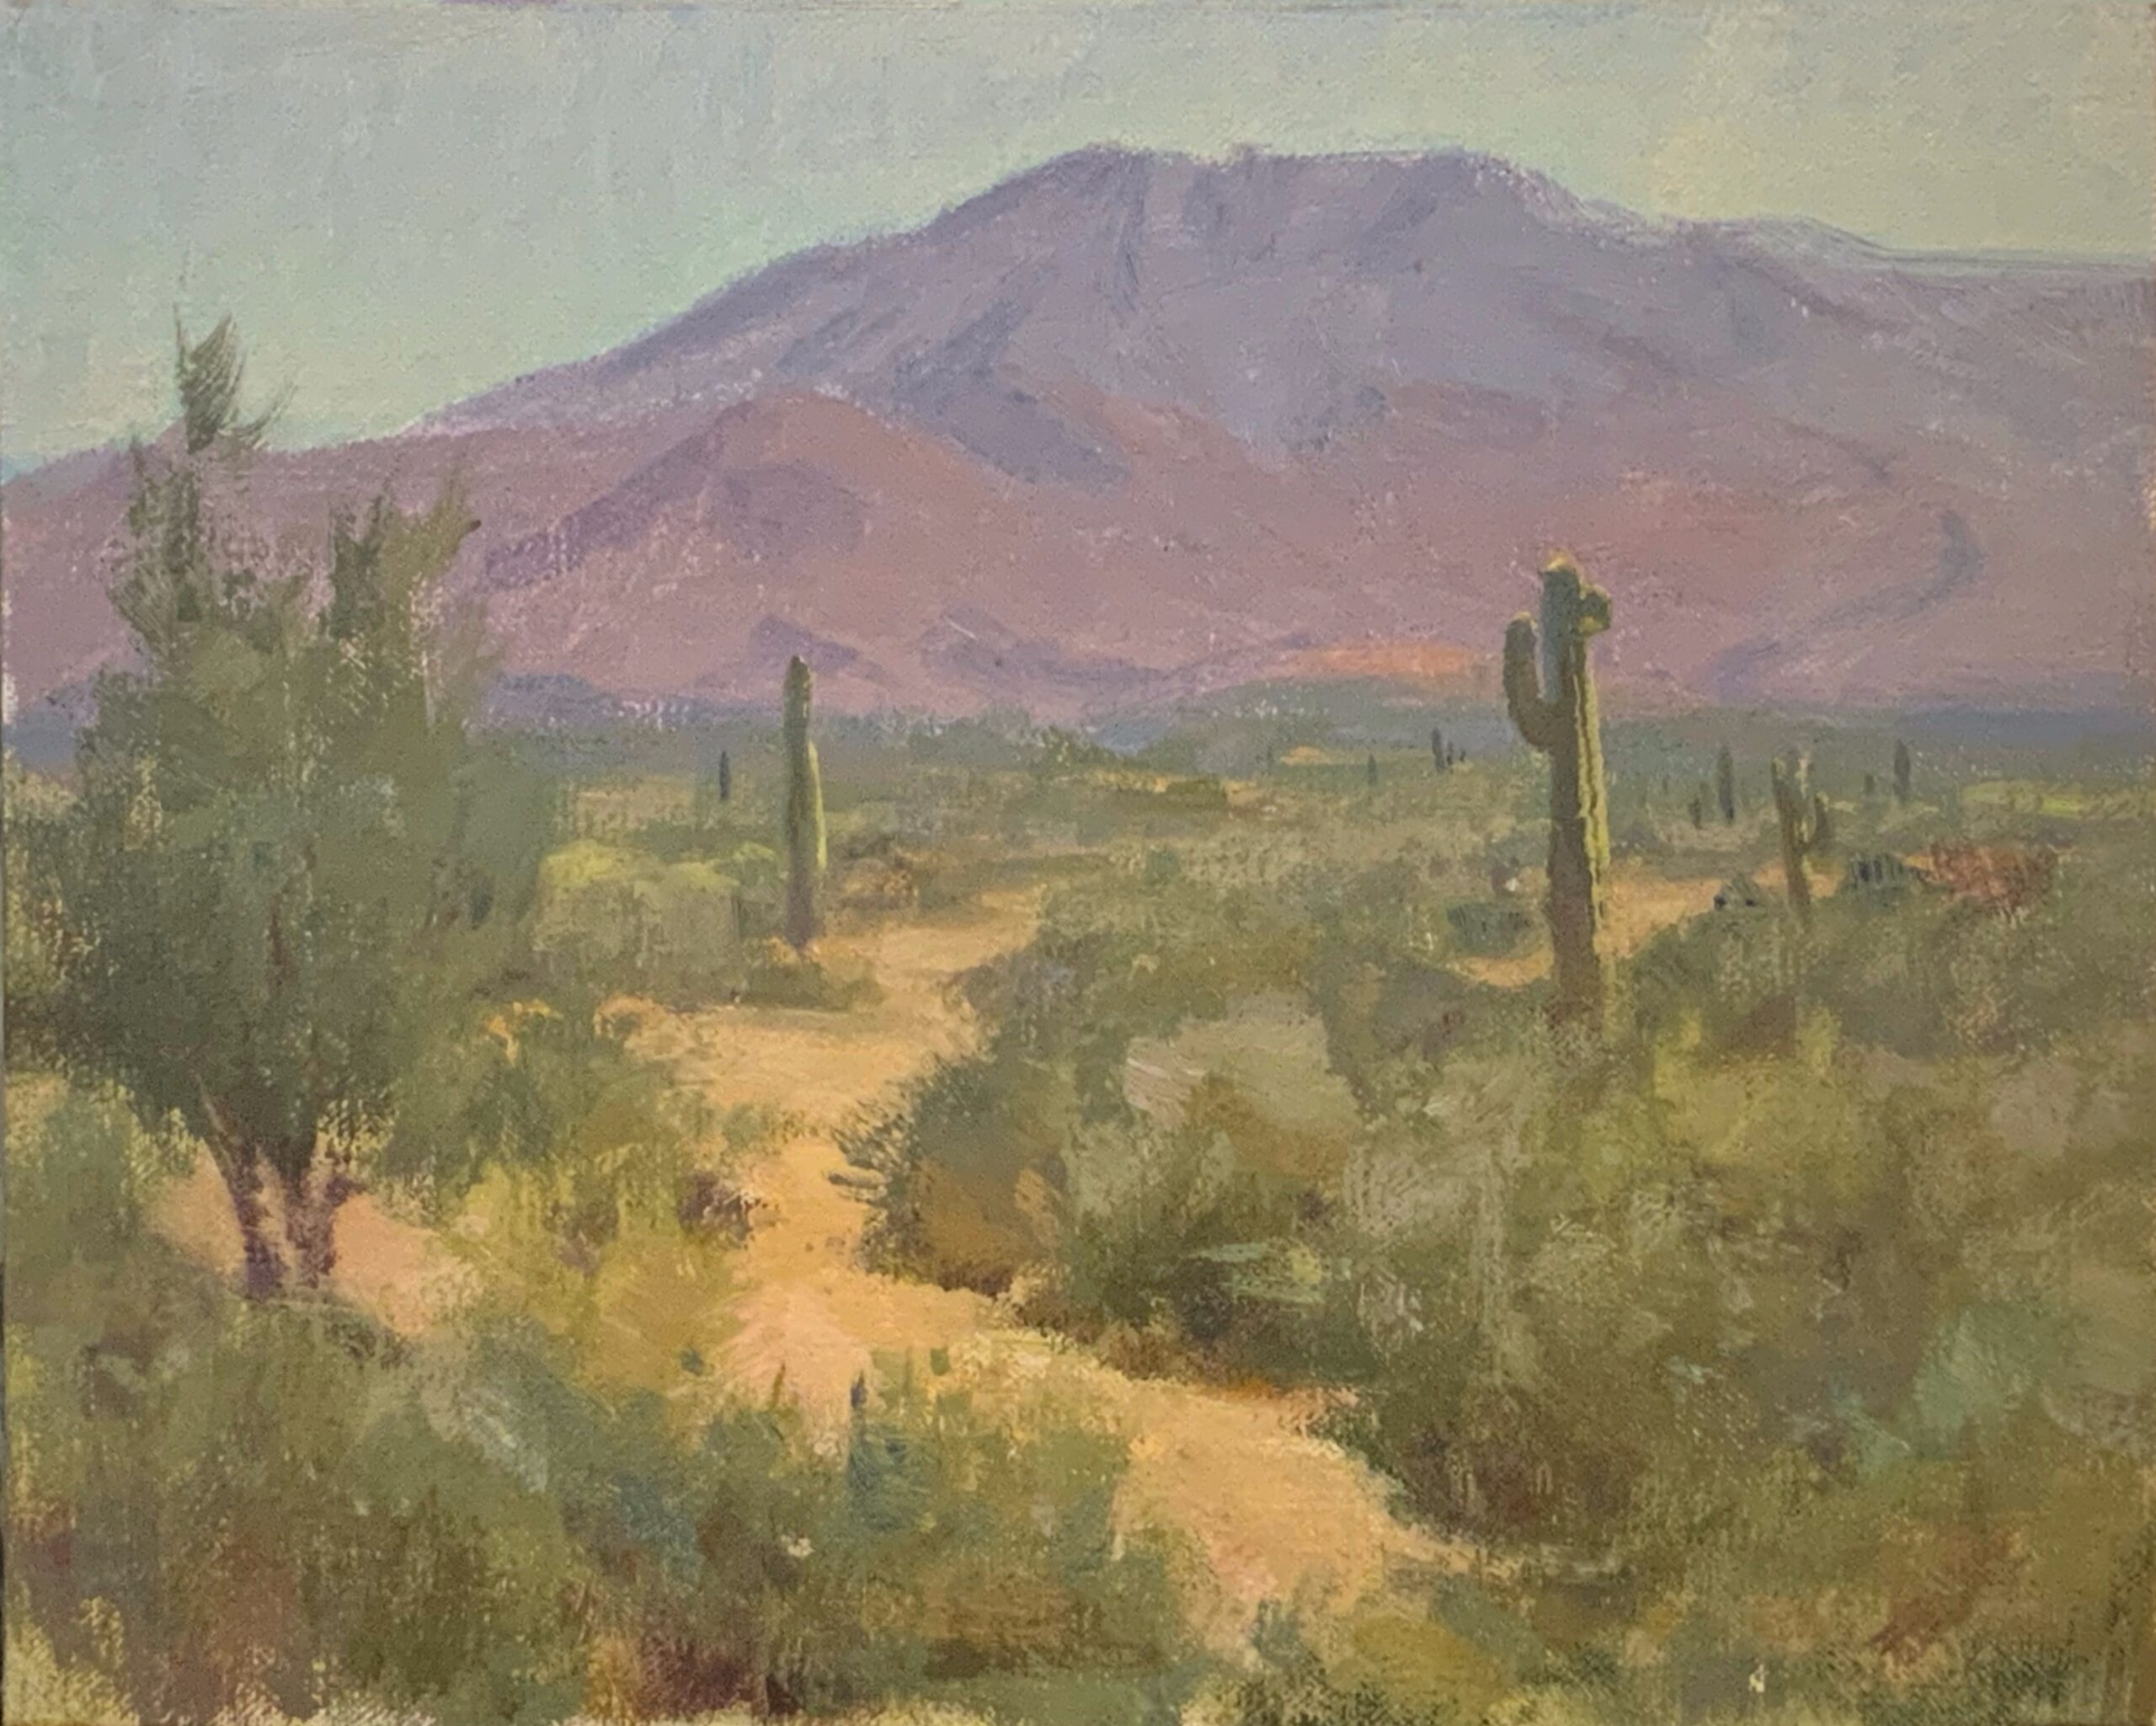 Scottsdale Morning Art Piece available at Hindes Fine Art Gallery